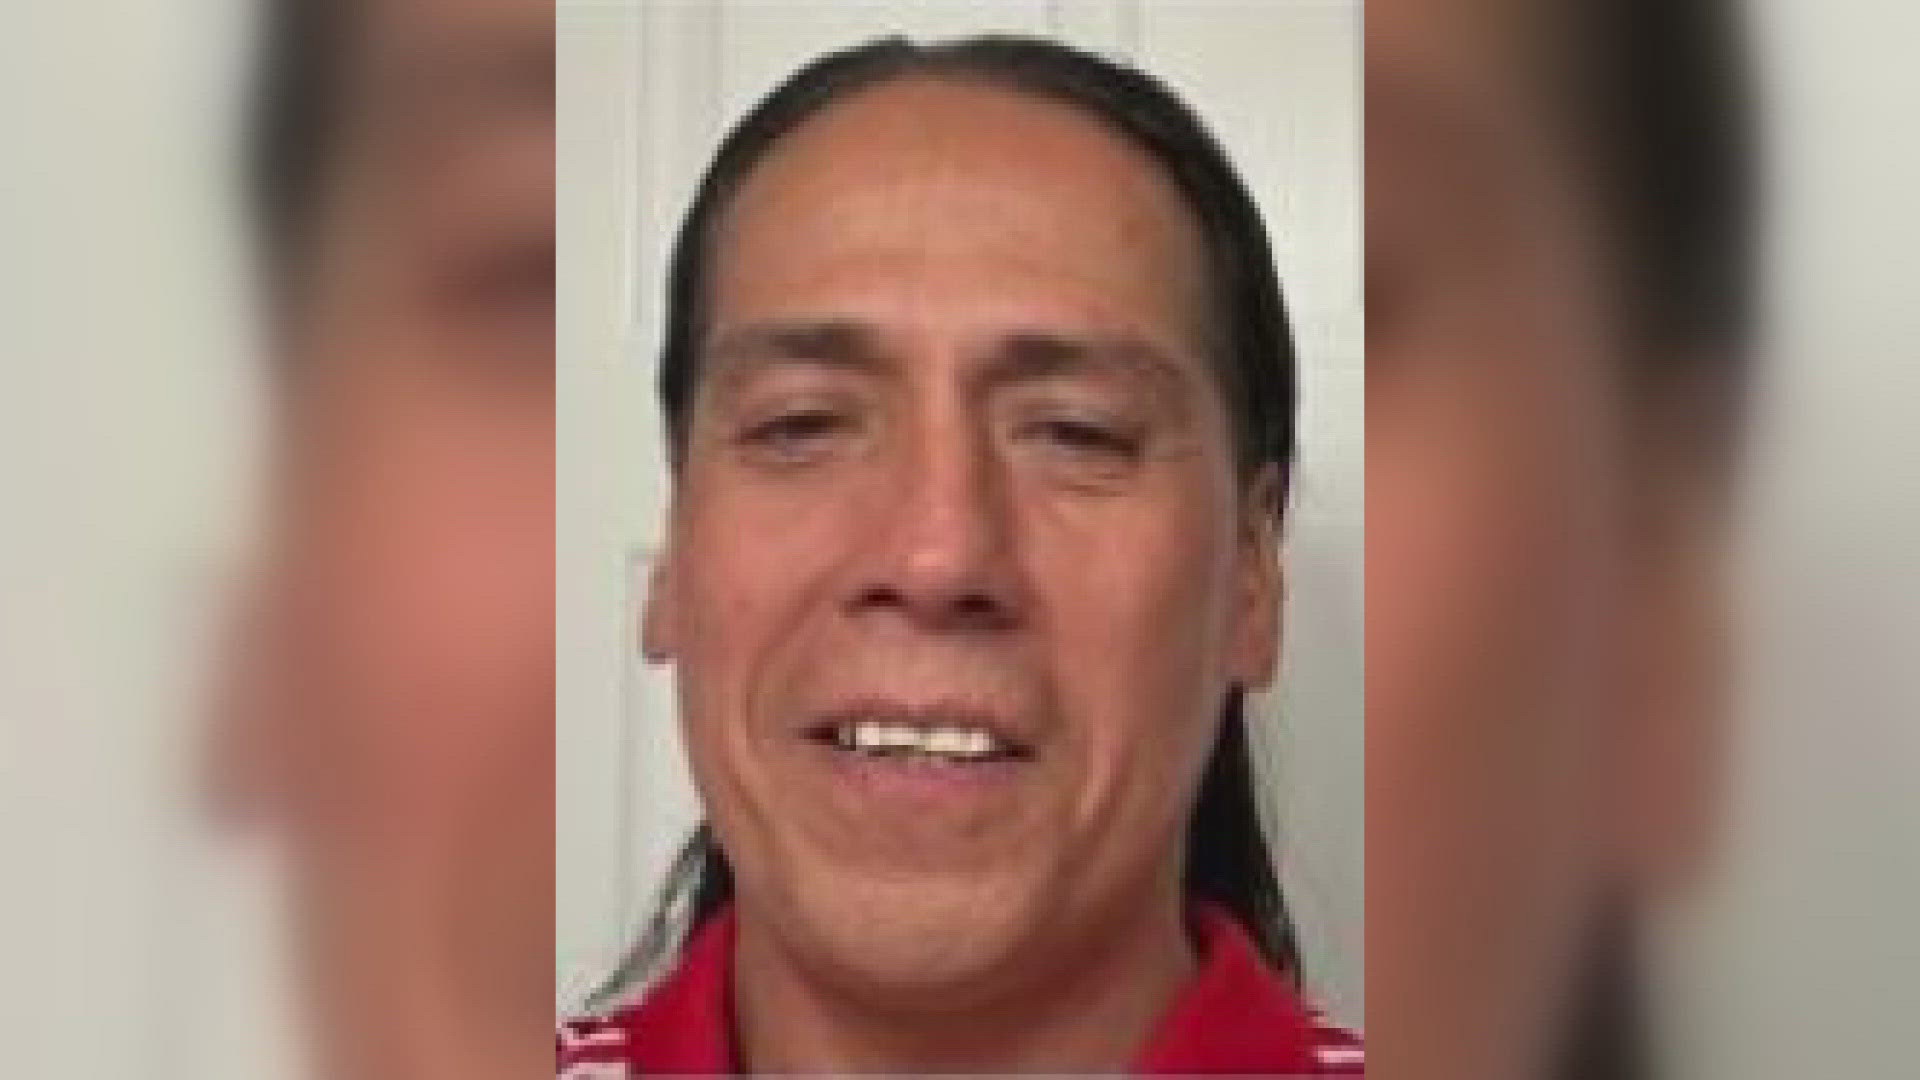 Fifty-one-year-old suspect Joseph Parisien is described as 5'10'', 180 pounds with black hair and brown eyes.